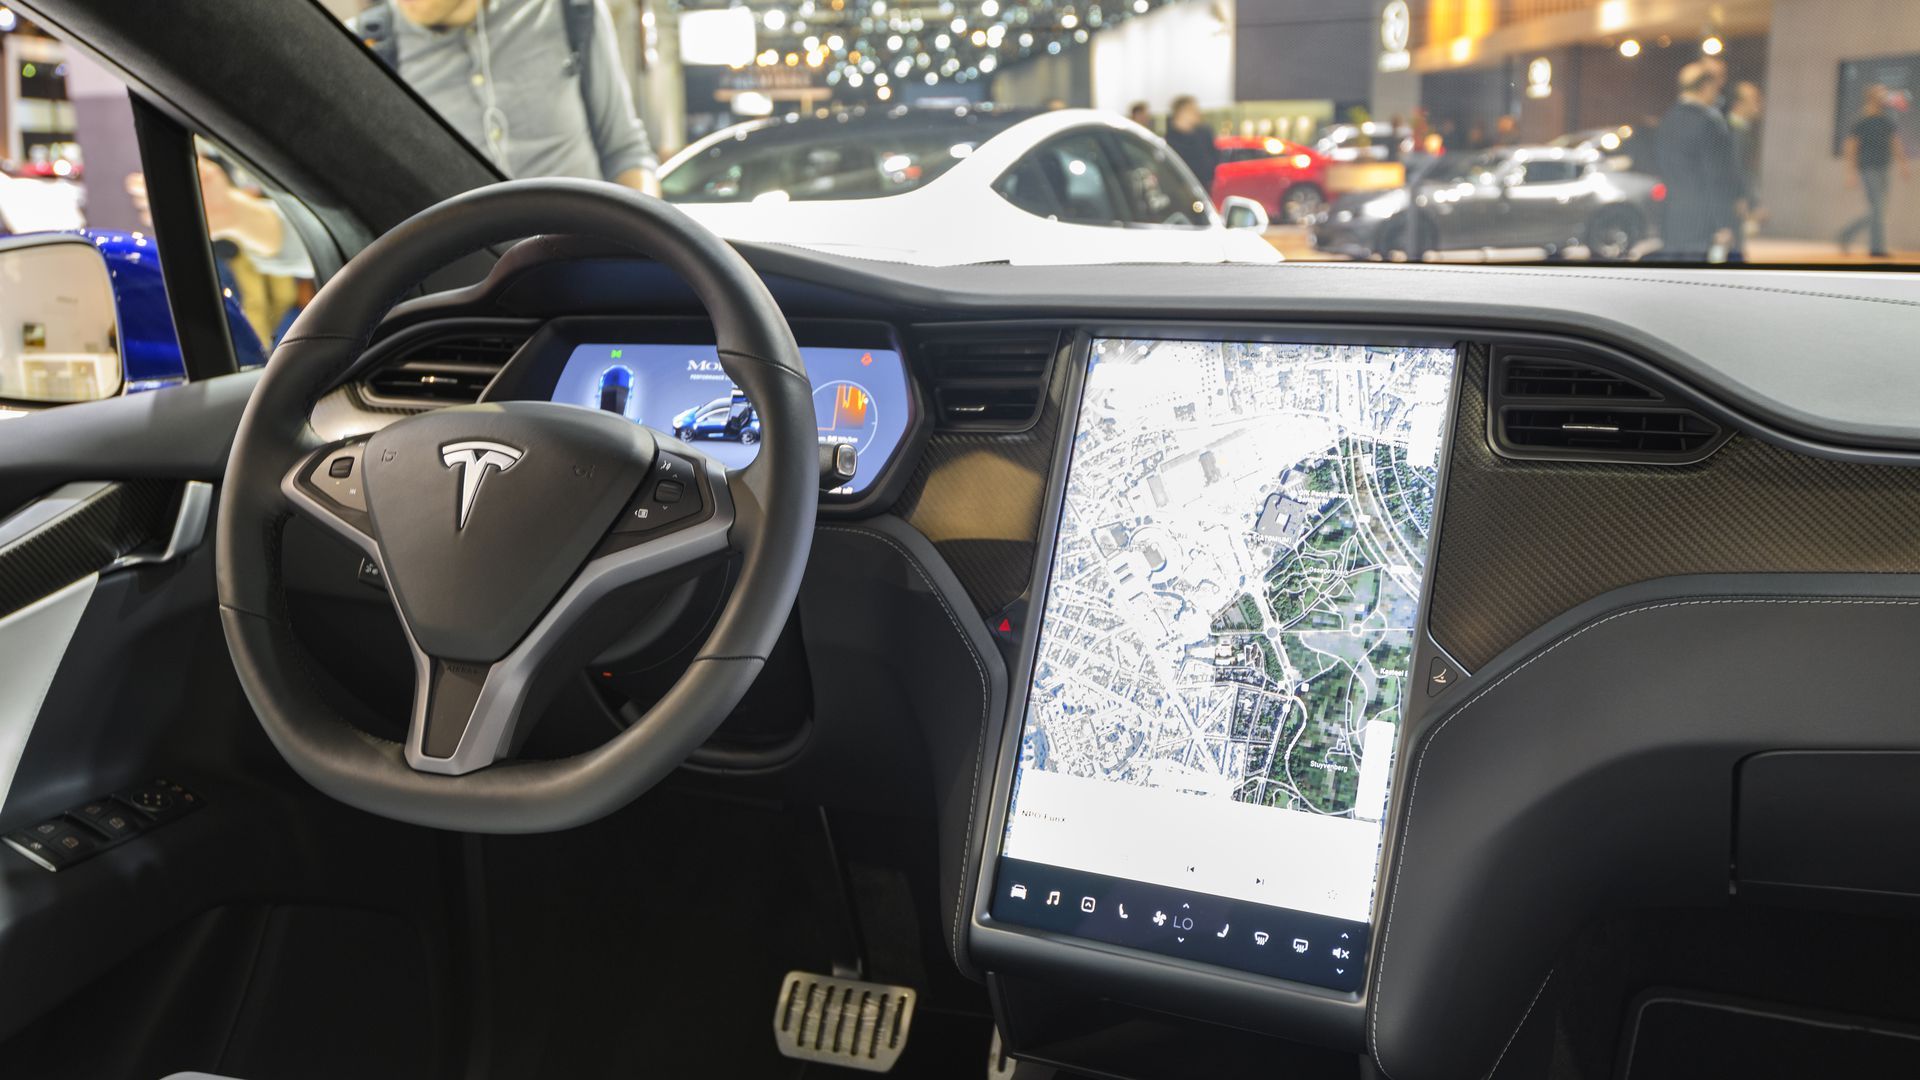 The Interior of a Tesla vehicle.